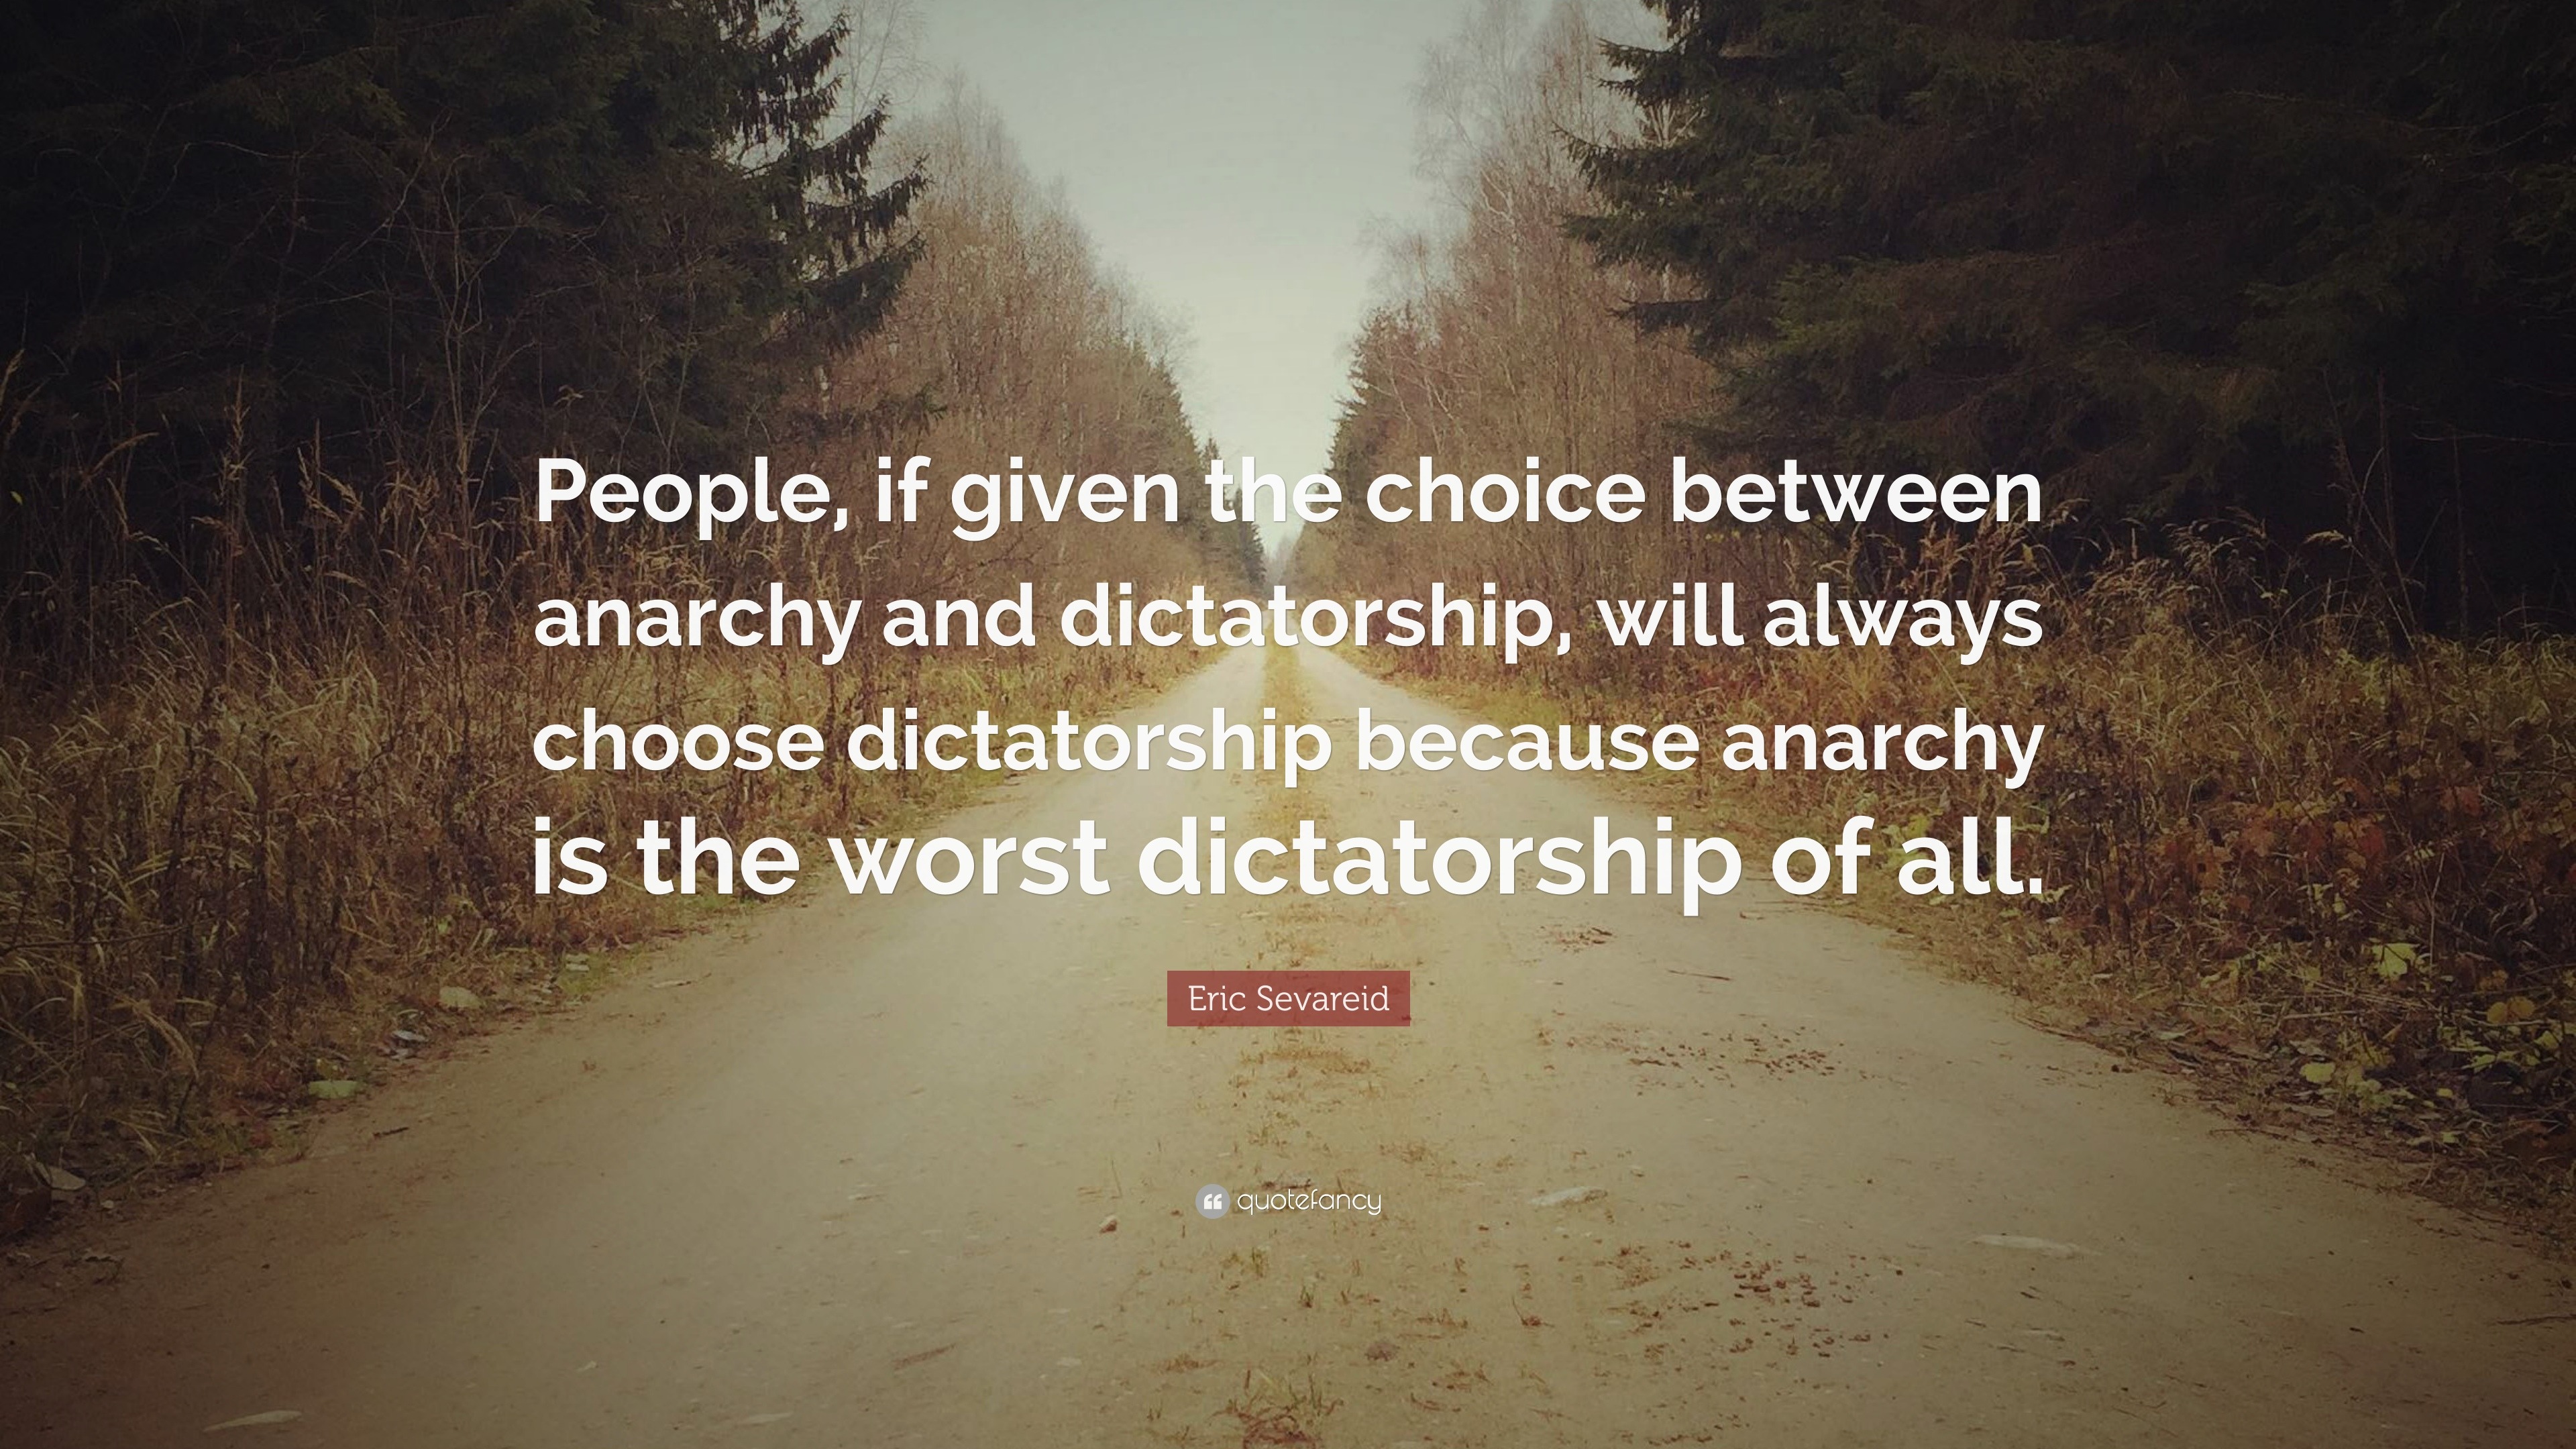 Eric Sevareid Quote: “People, if given the choice between anarchy and ...